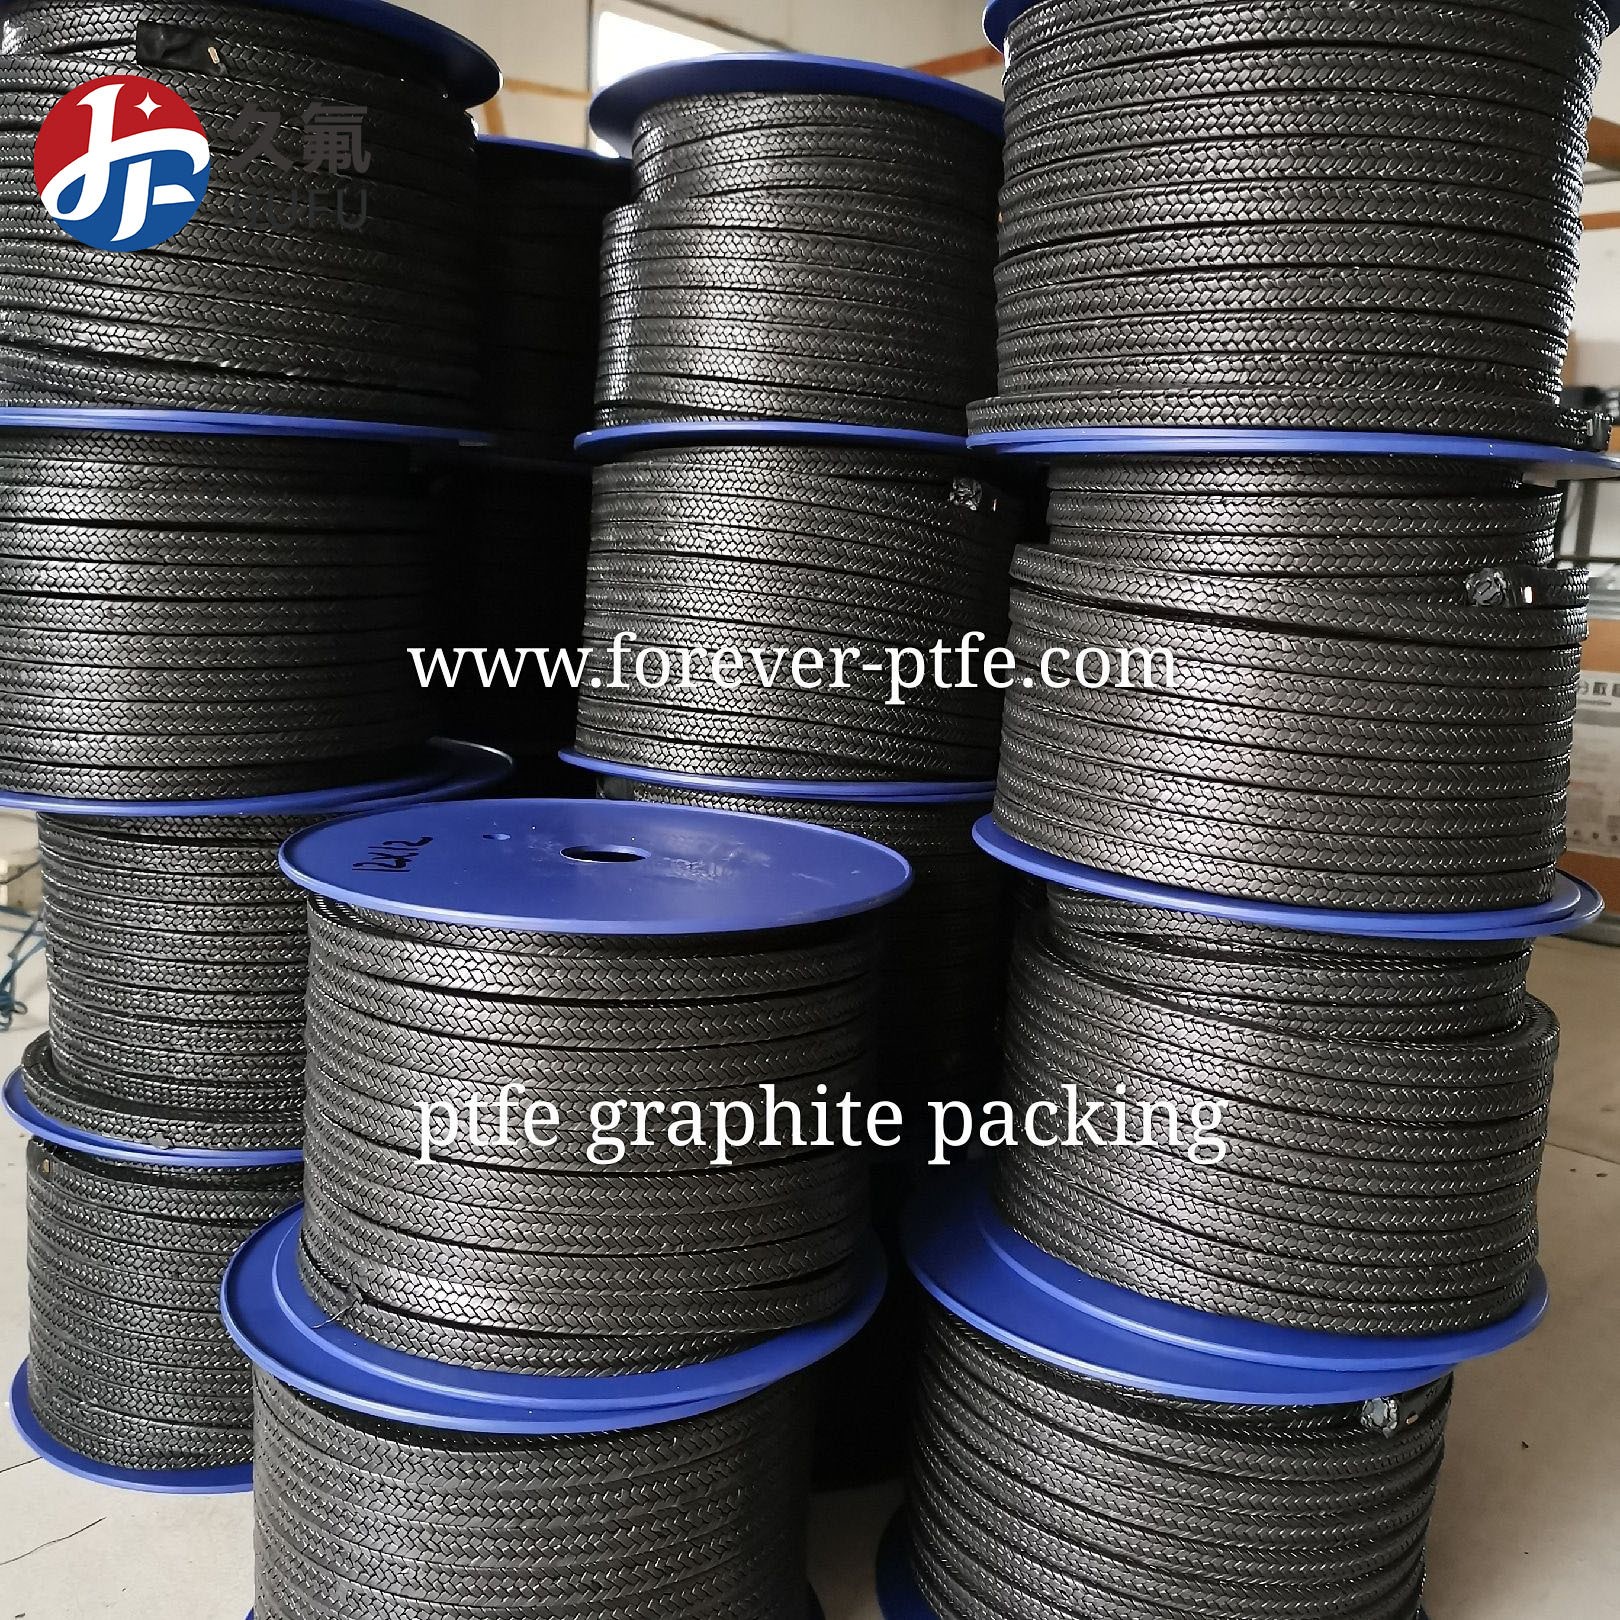 Professional expanded ptfe graphite gland packing with high quality